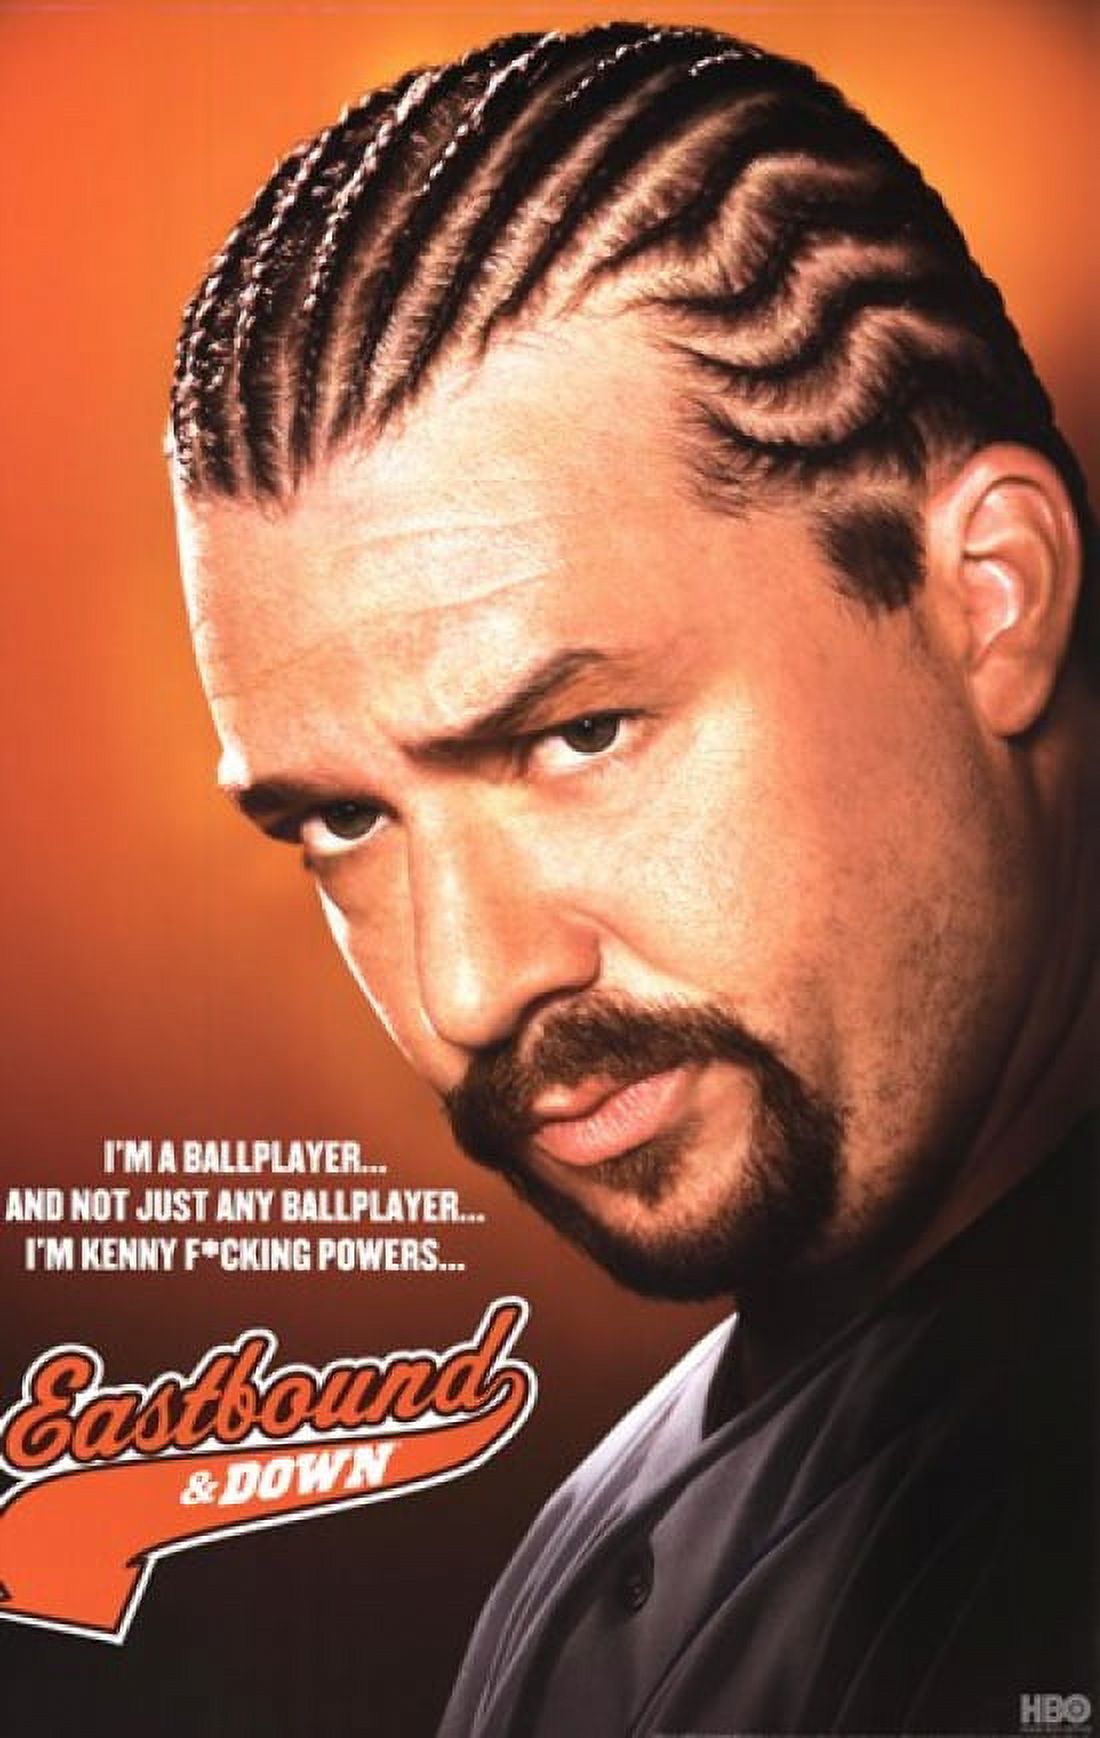 Pic of kenny powers